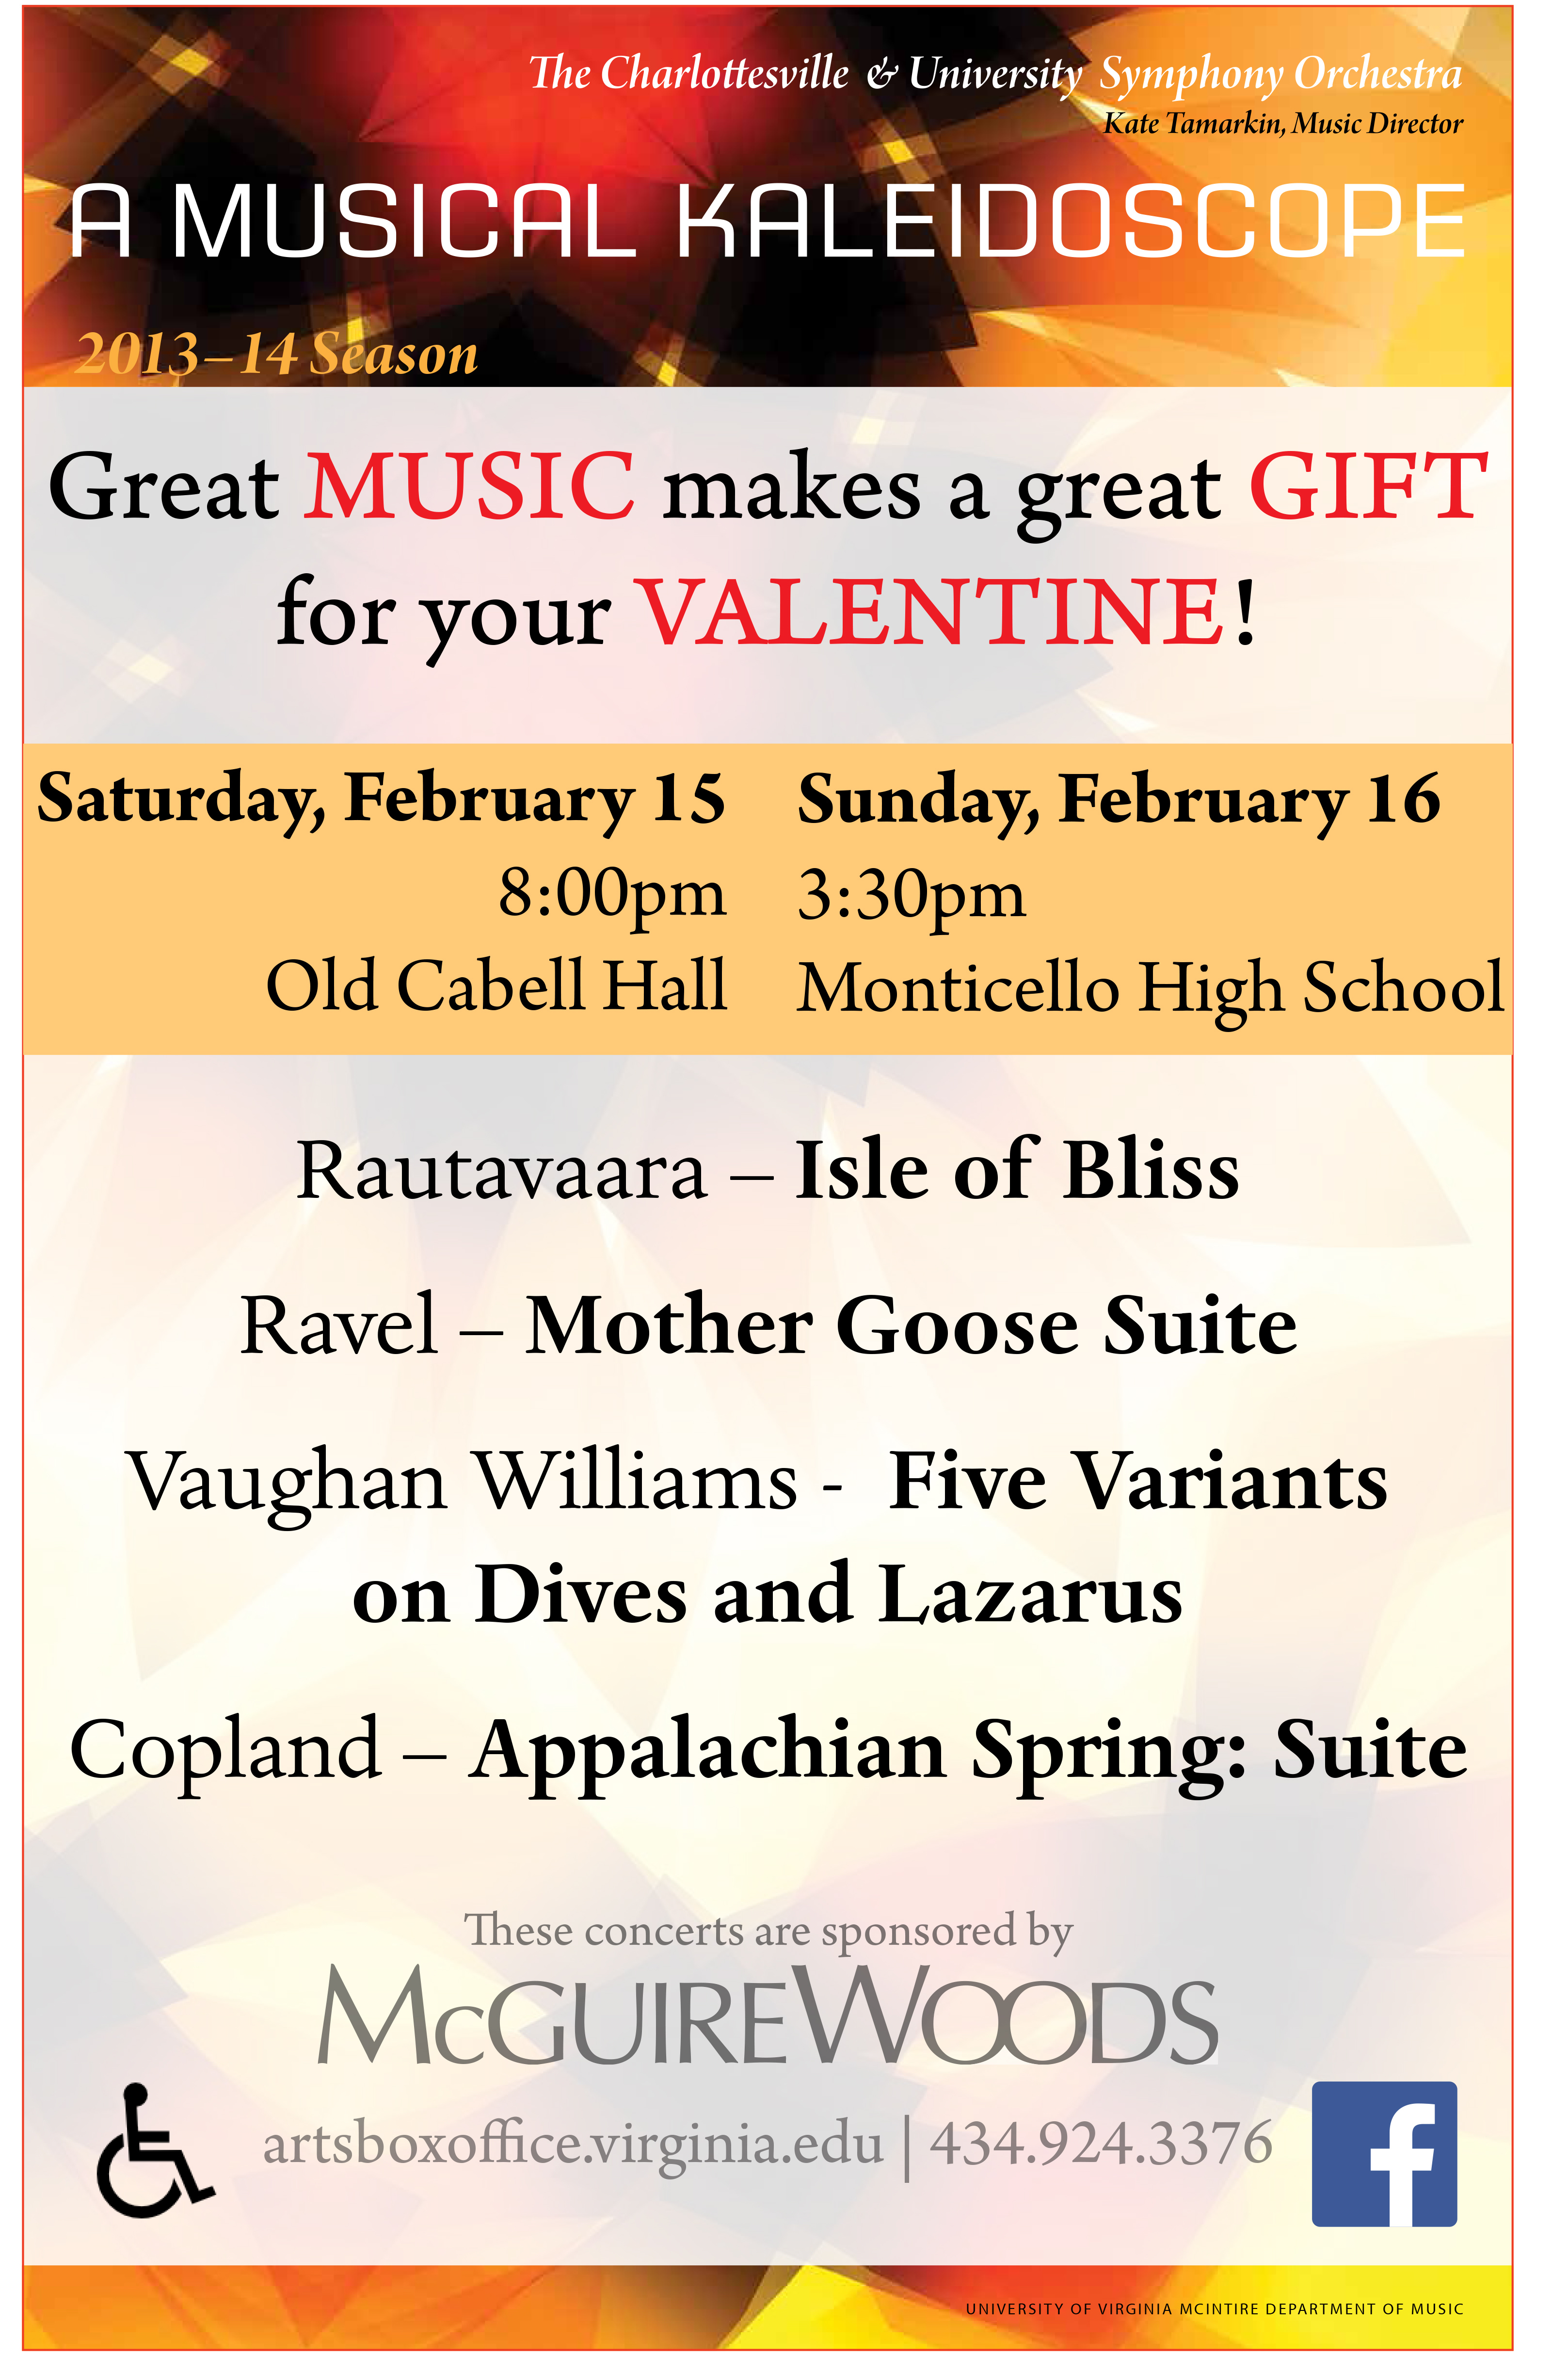 text reads: A musical kaleidoscope.  Great Music makes a great gift for your valentine! Saturday, February 15 8pm Old Cabell Hall. Sunday, February 16 3:30pm Monticello High School.  Rautavaara - Isle of bliss.  Ravel - Mother Goose Suite.  Vaughan Williams - Five Variants on Dives and Lazarus.  Copland - Appalachian Spring: Suite. These concerts are sponsored by McGuire Woods.  artsBoxOffice.virginia.edu | 434.924.3376